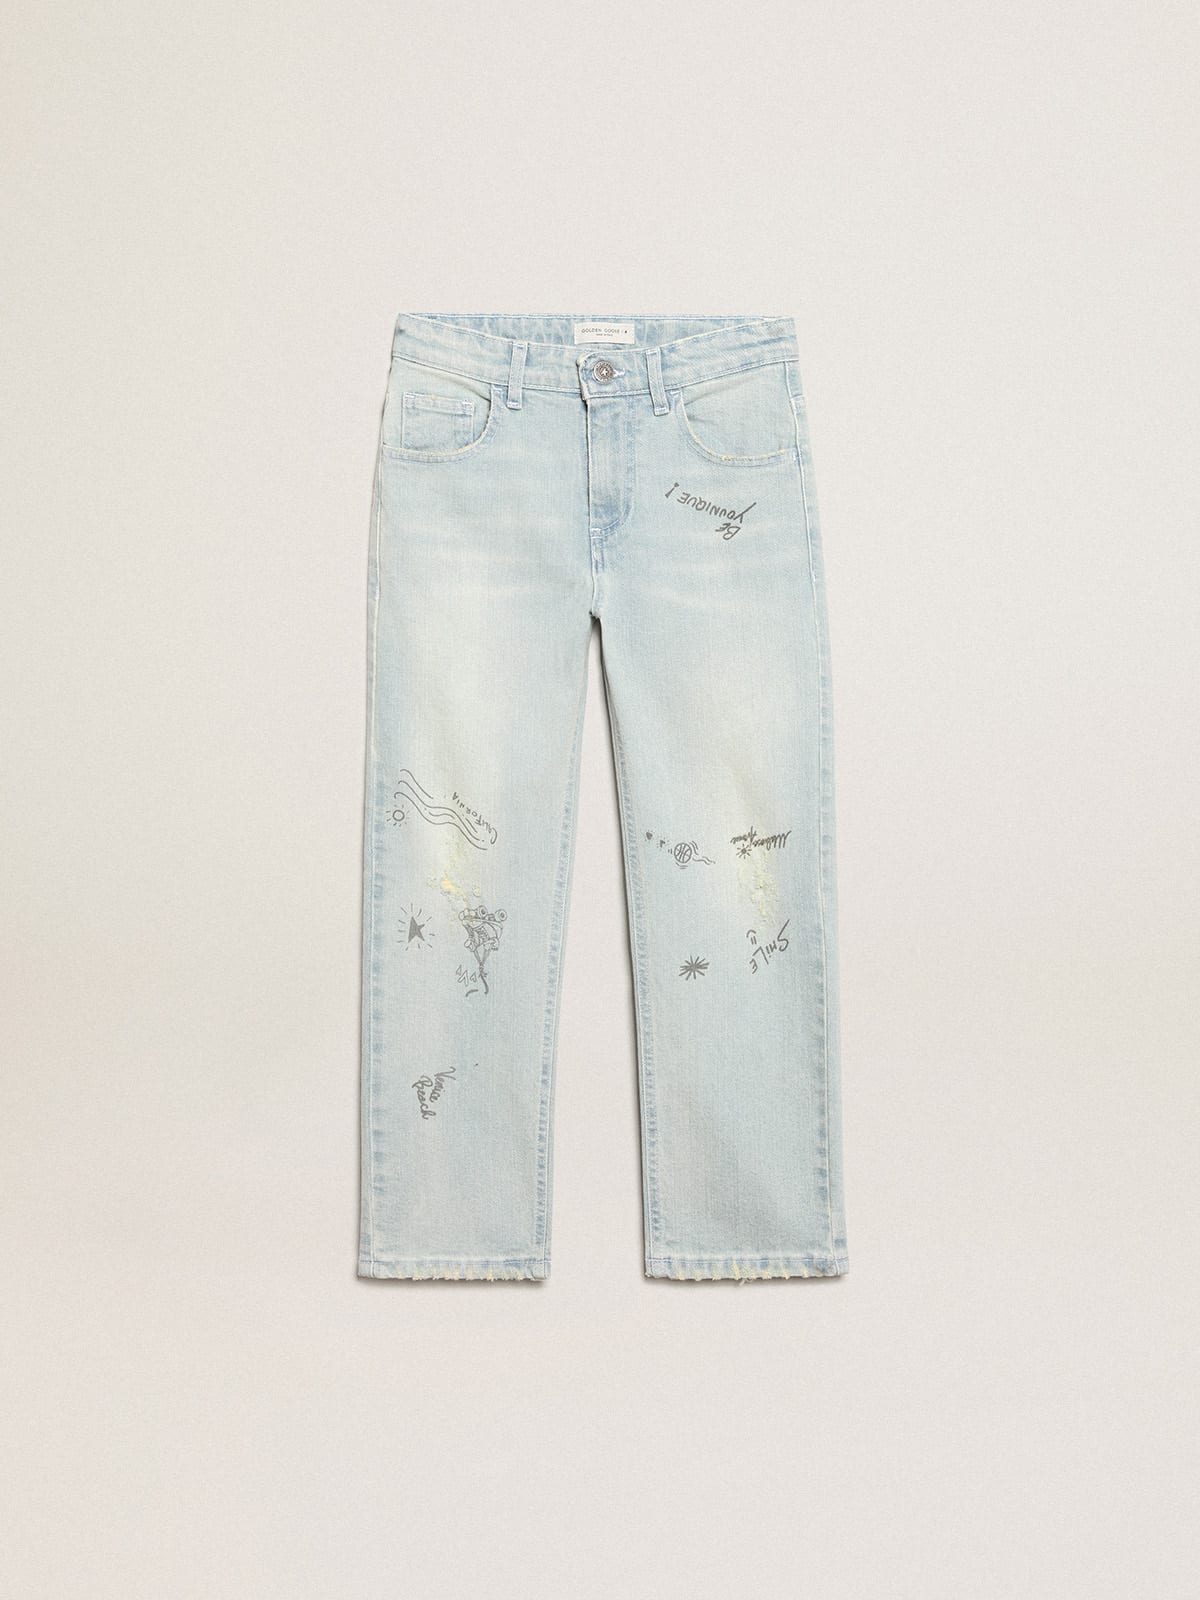 Boys' bleached jeans with distressed treatment